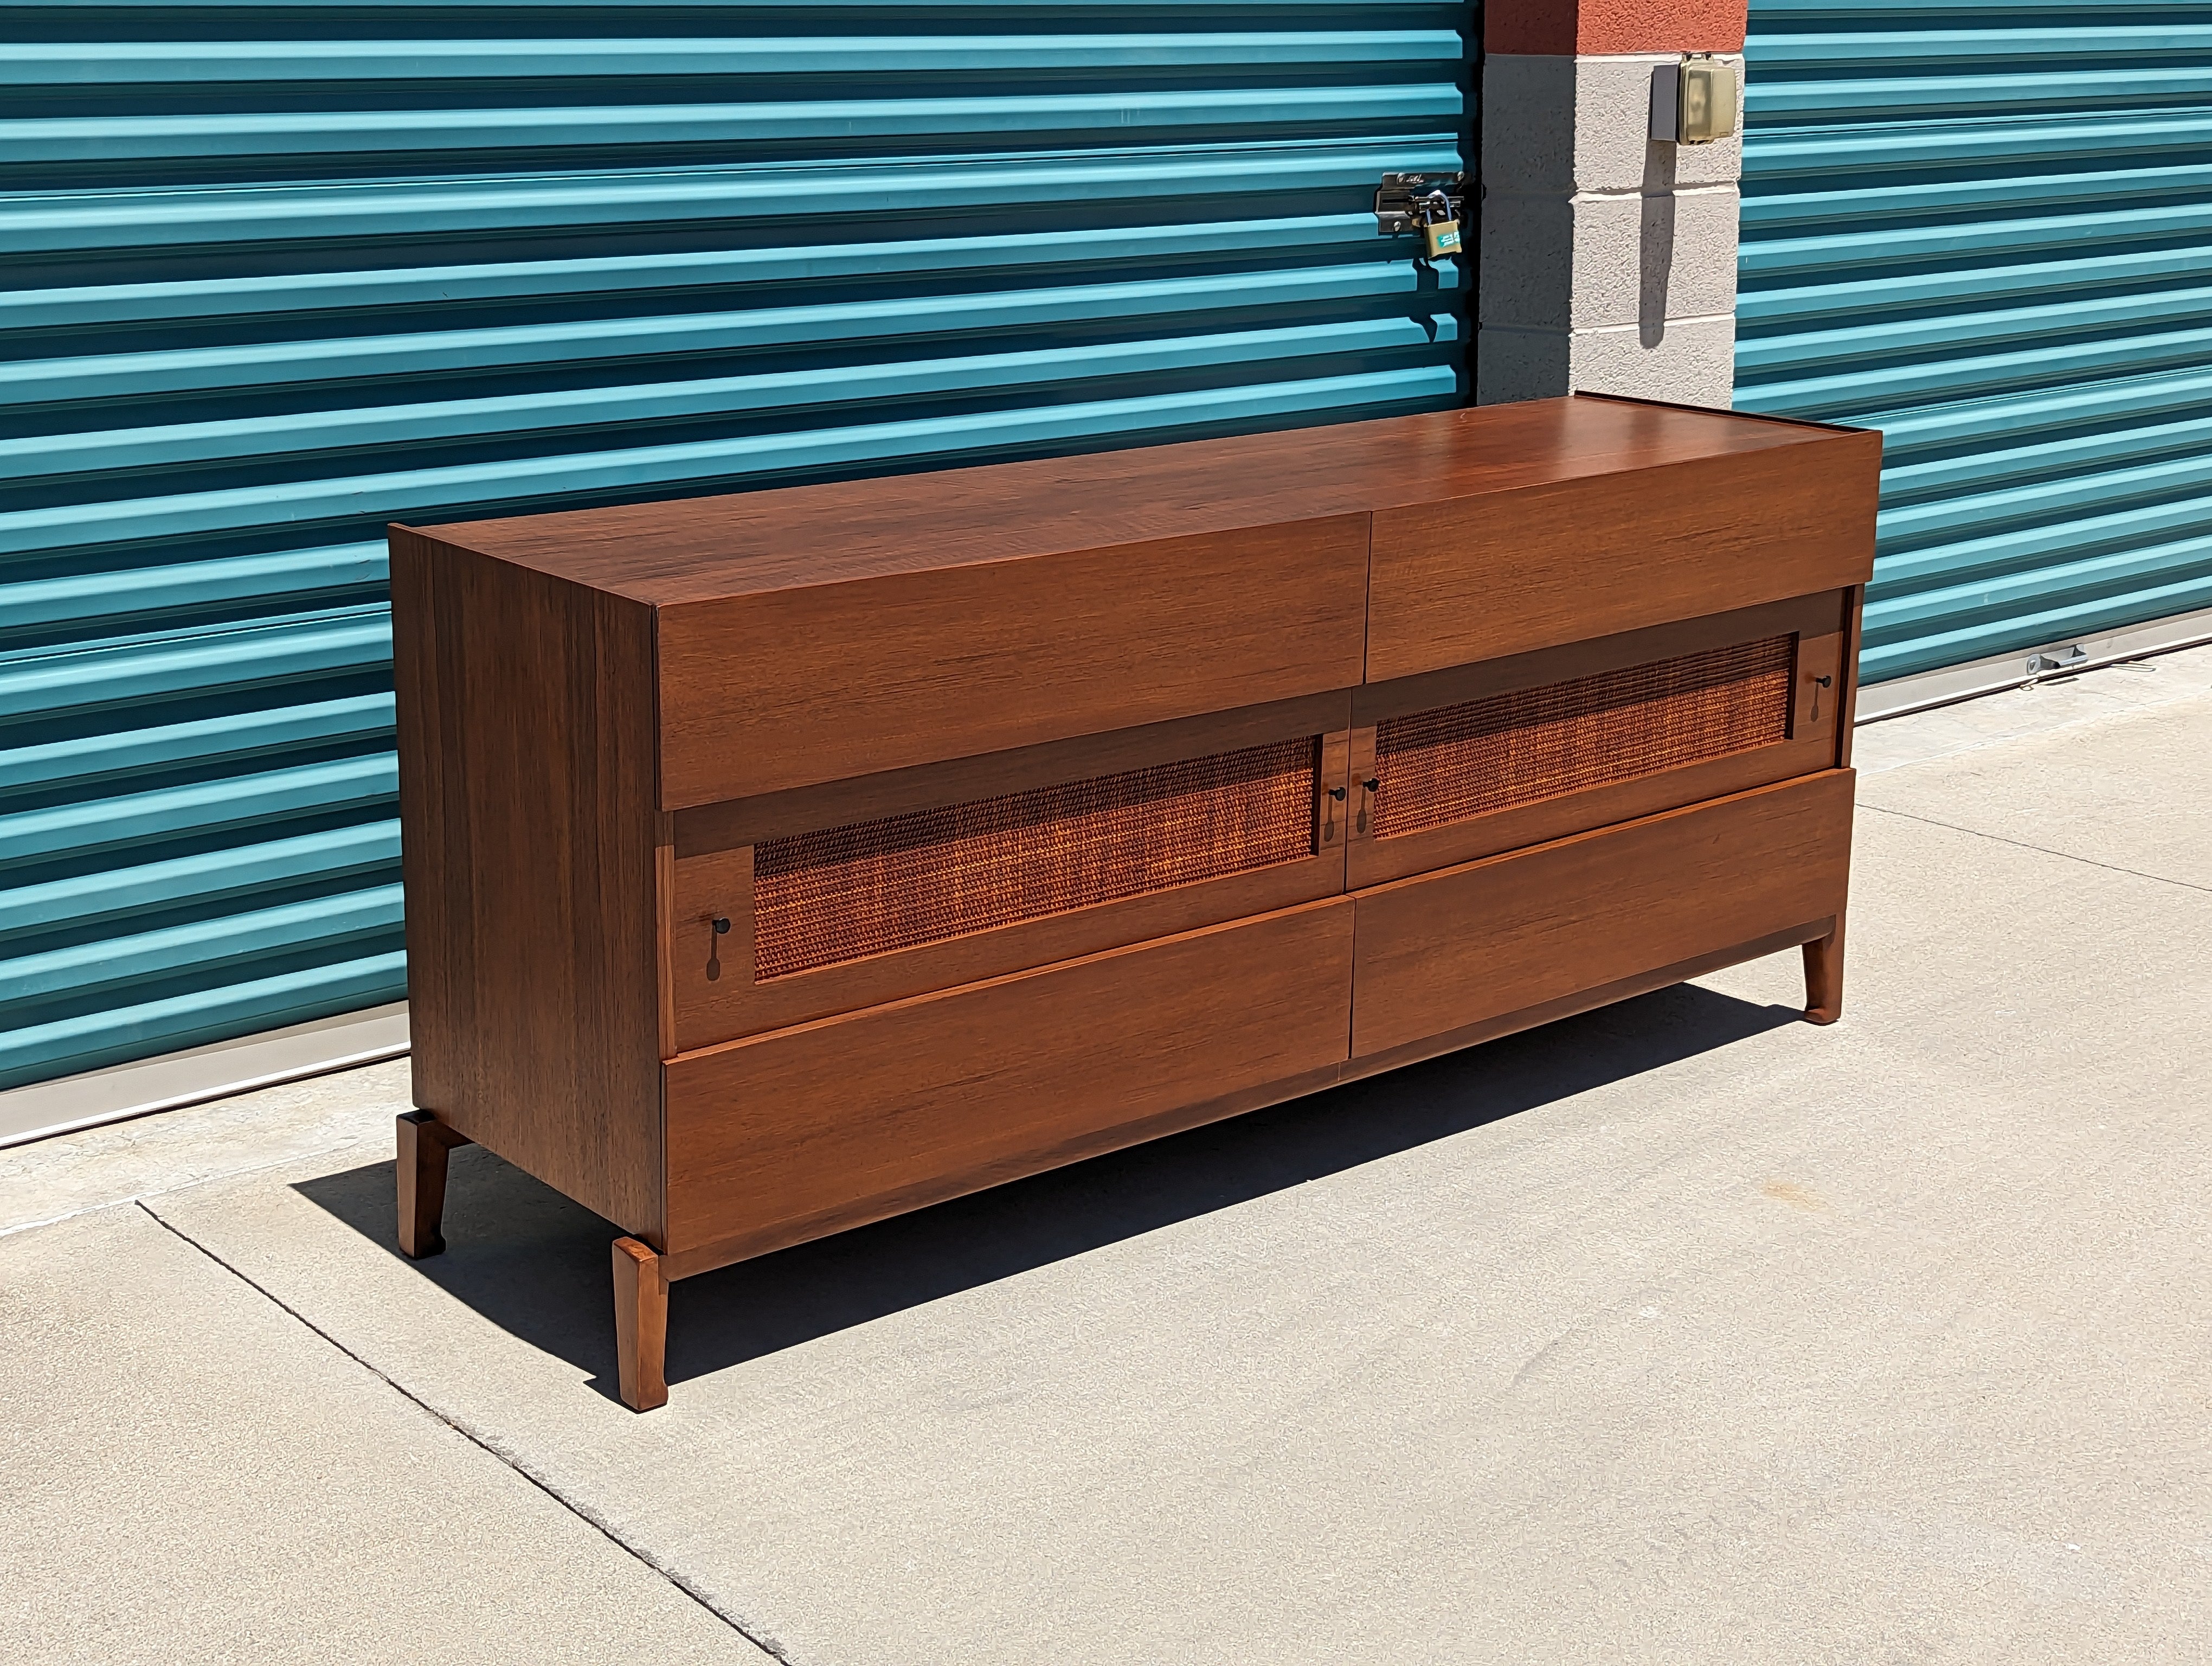 Elevate your living space with a touch of timeless elegance courtesy of this exquisite Swedish Mid Century Modern Walnut Dresser by renowned designer Edmond J. Spence, dating back to the captivating 1950s. A coveted gem, recently discovered in the